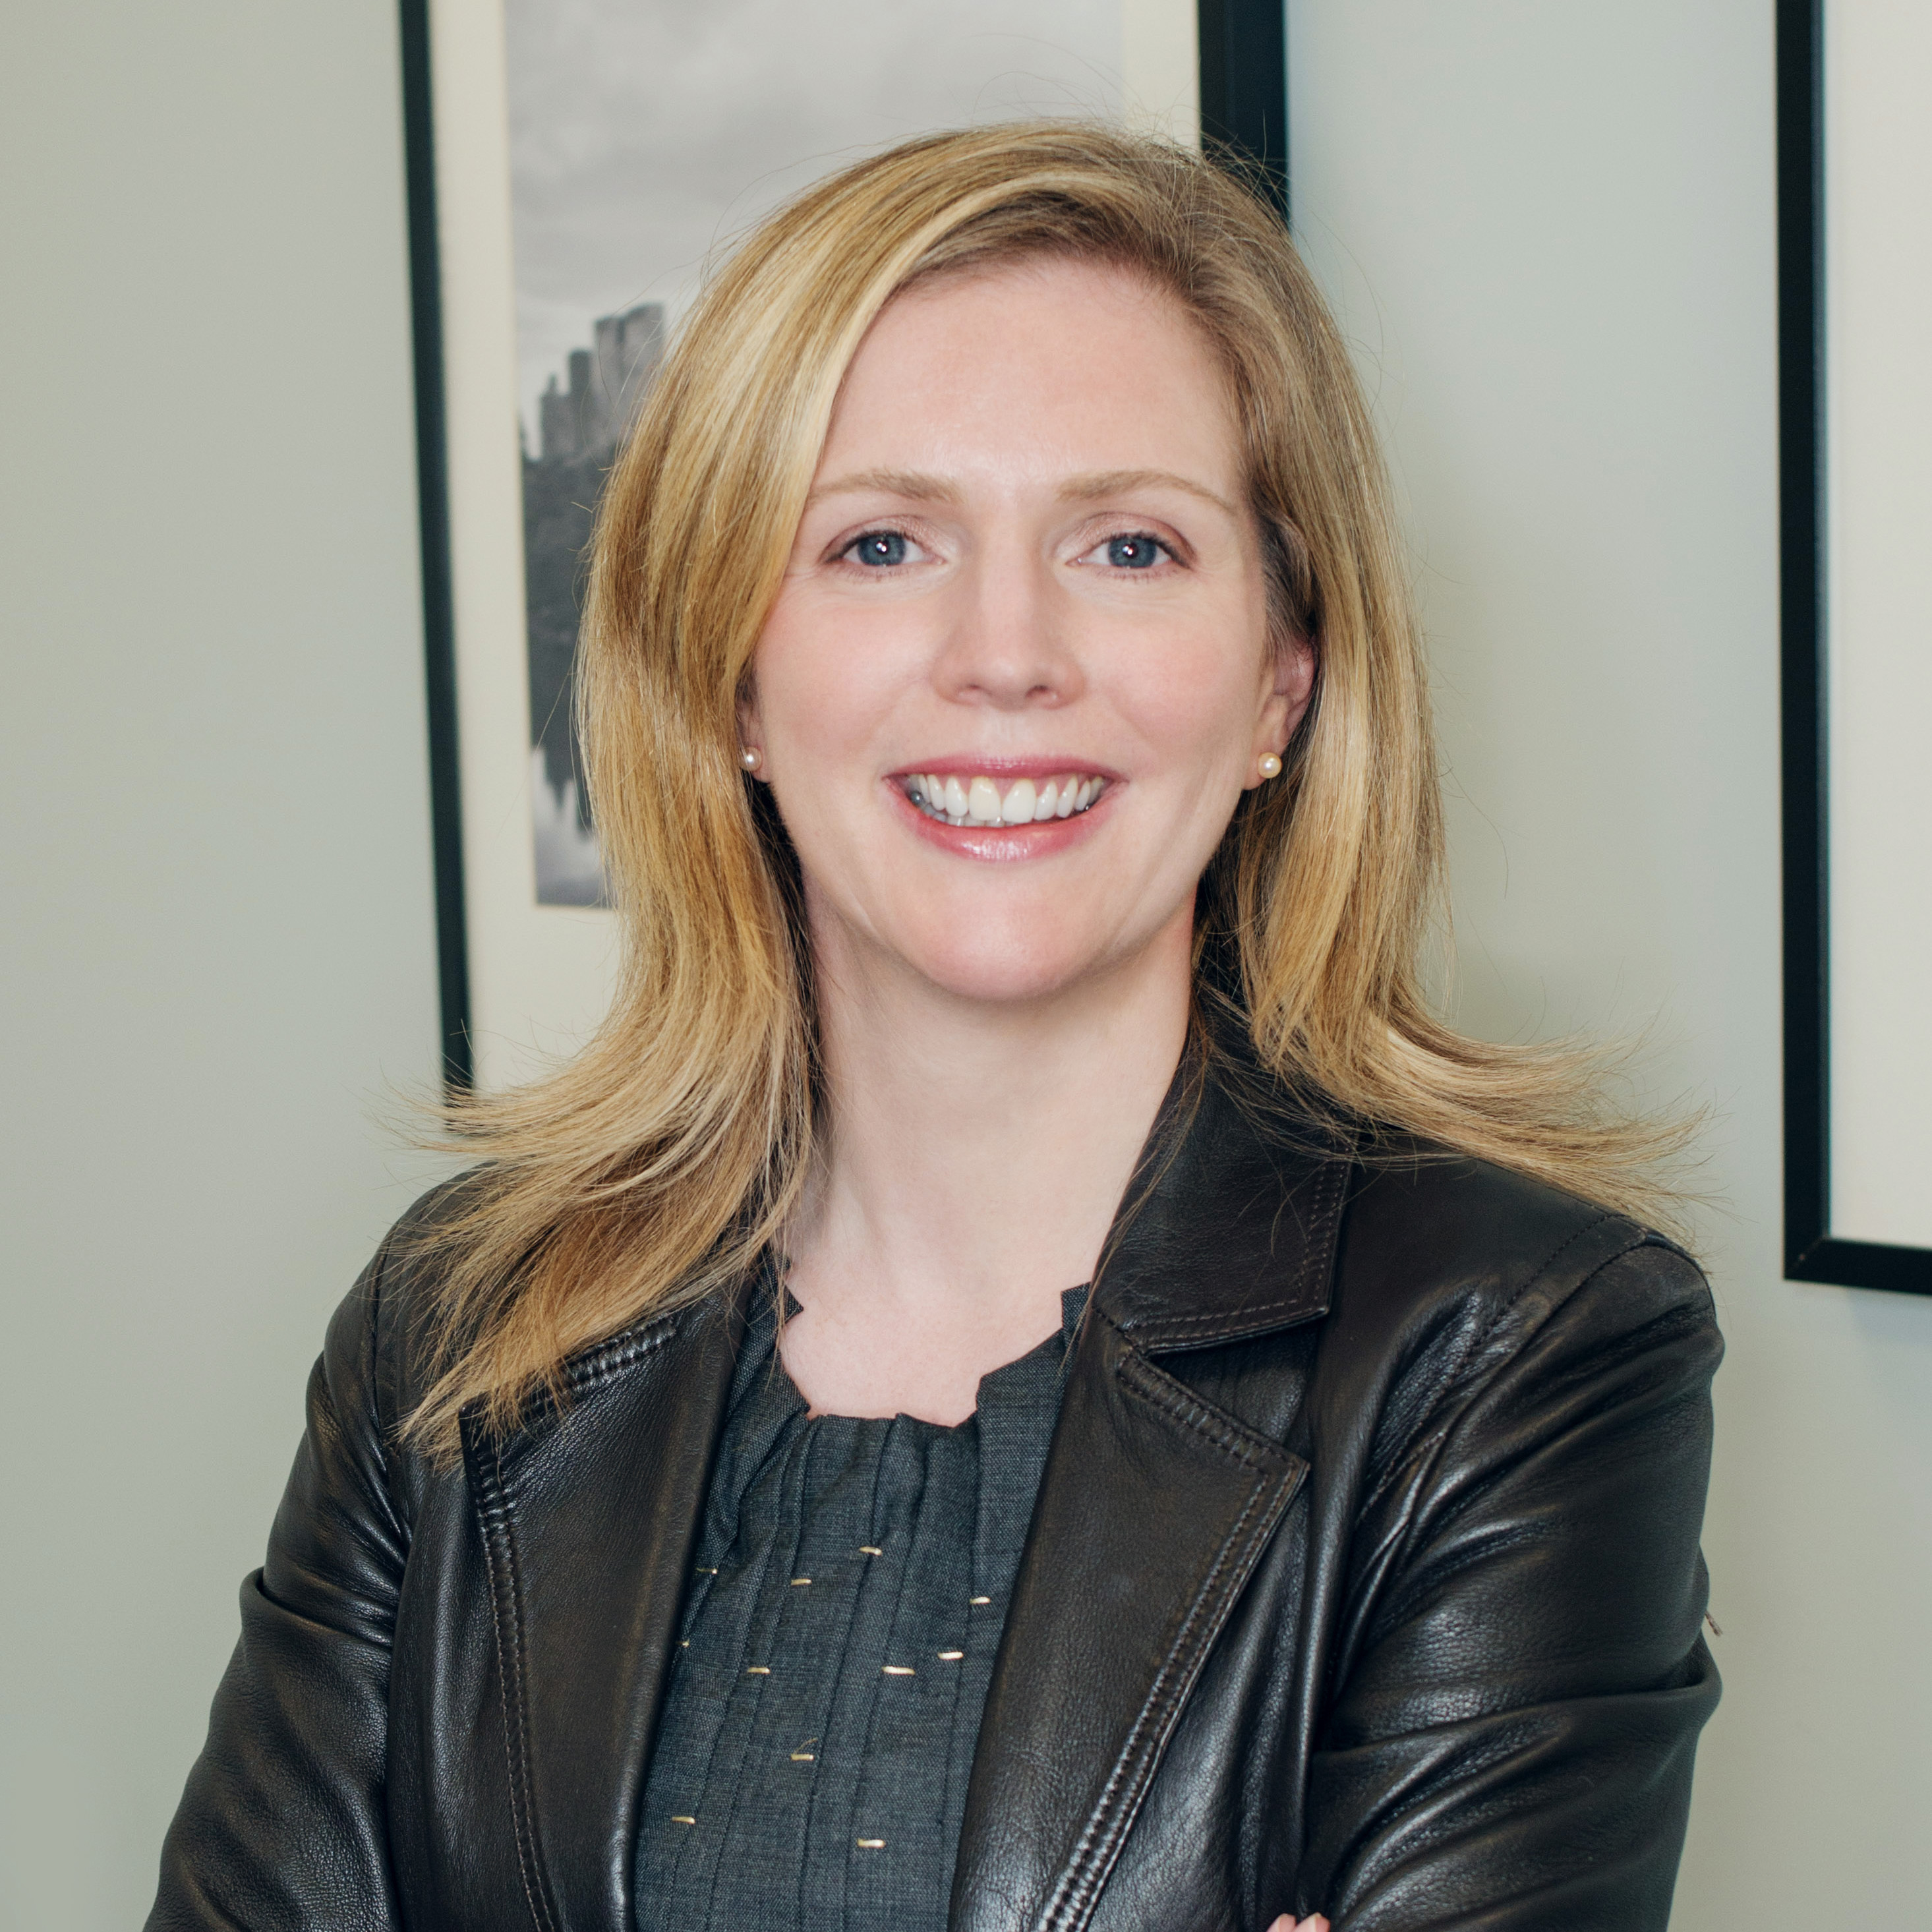 YSC appoints Tessa Breslin to Managing Director & Head of YSC Americas